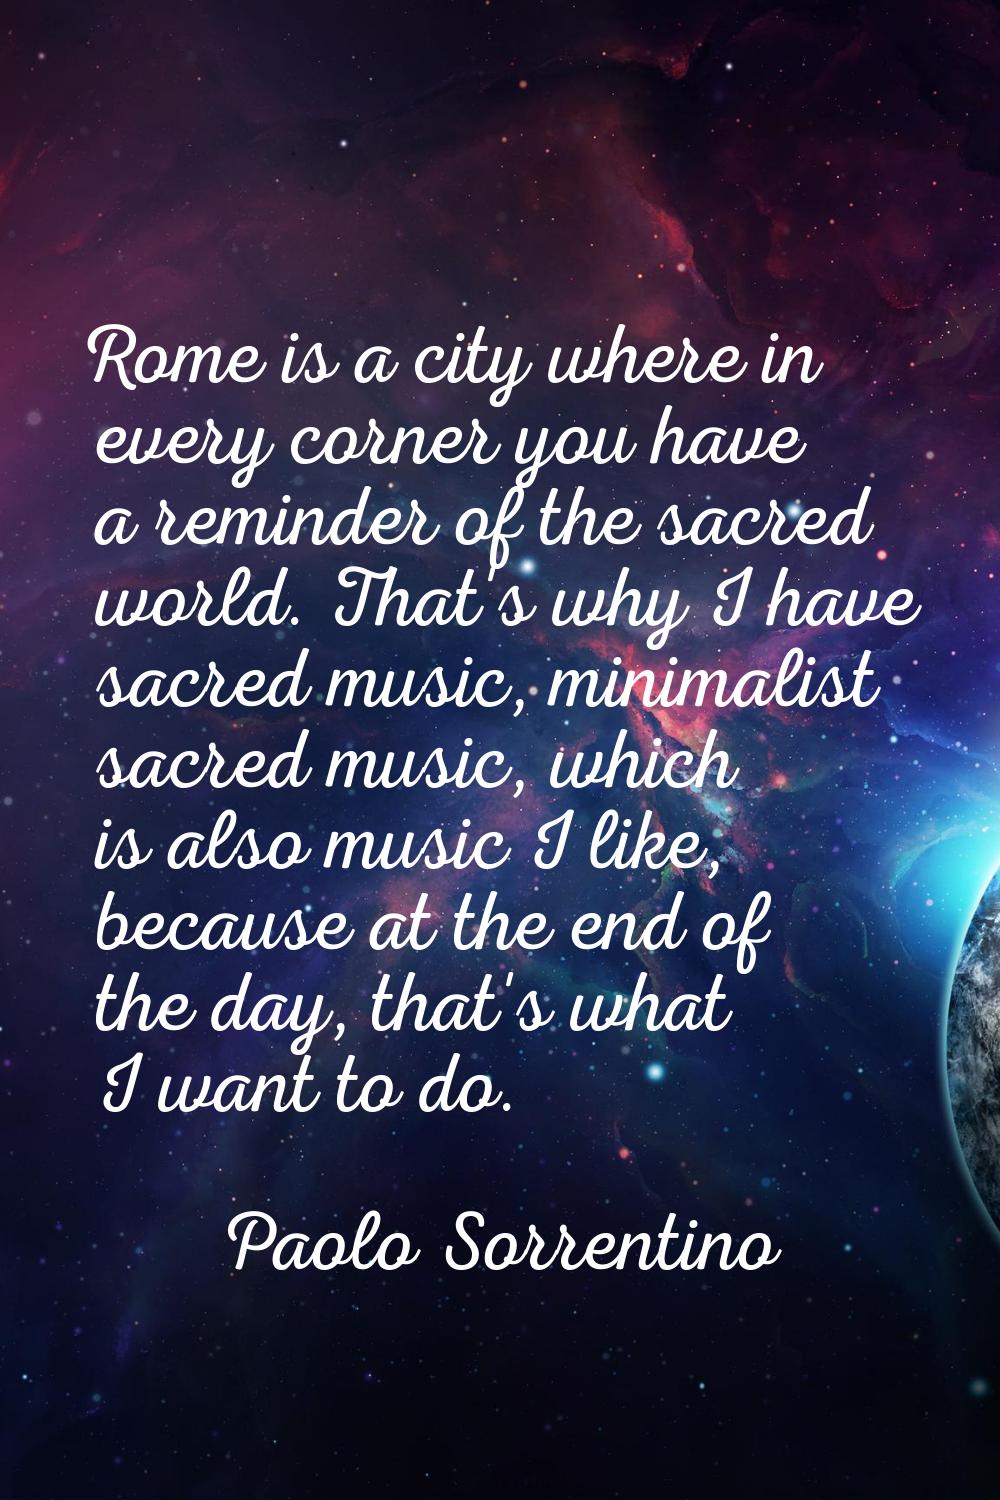 Rome is a city where in every corner you have a reminder of the sacred world. That's why I have sac